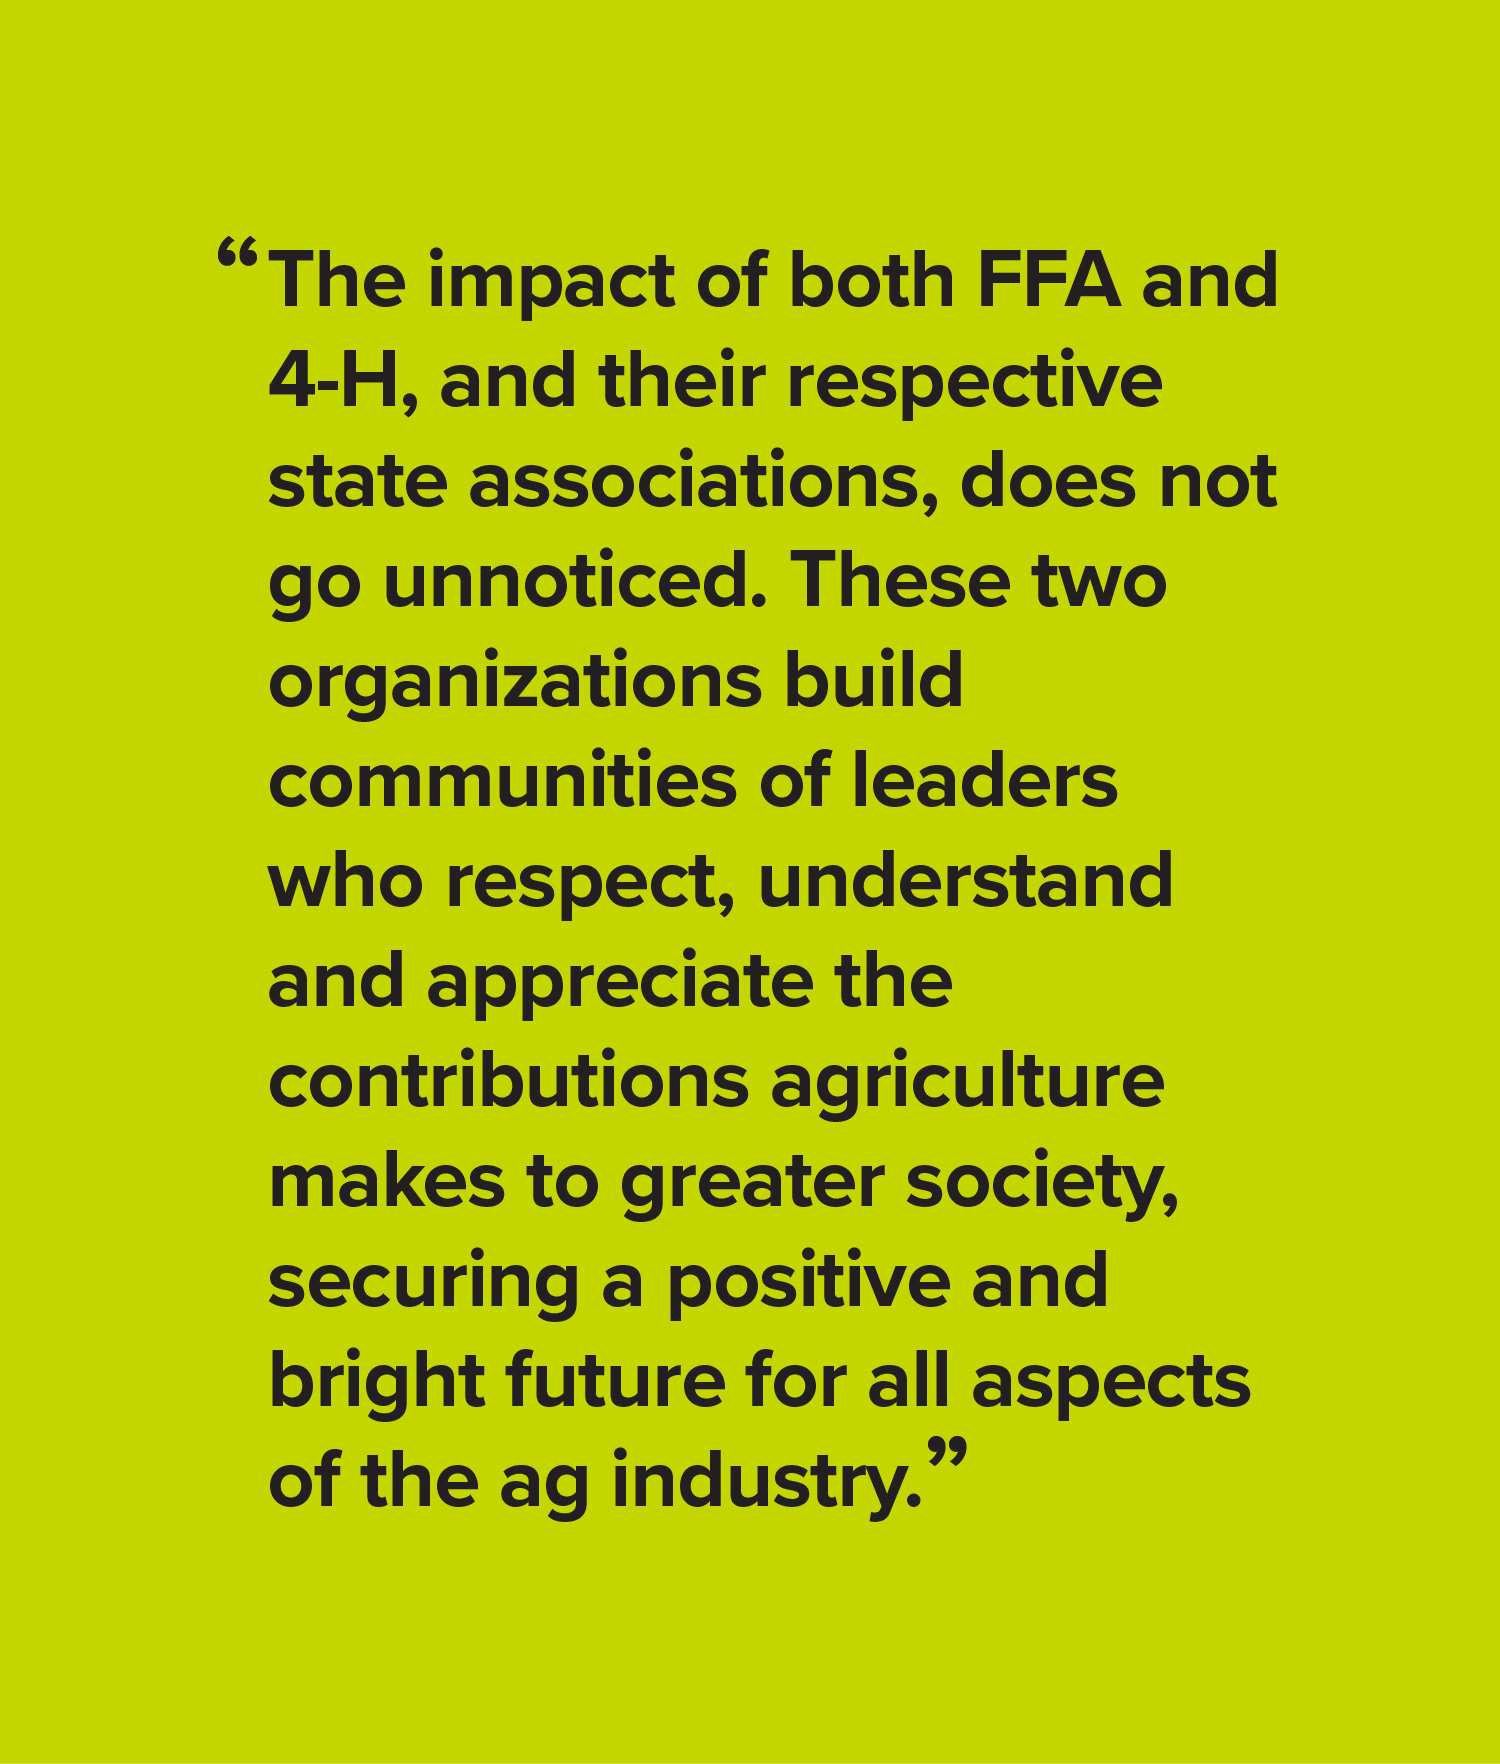 The impact of both FFA and 4-H, and their respective state associations, does not go unnoticed. These two organizations build communities of leaders who respect, understand and appreciate the contributions agriculture makes to greater society, securing a positive and bright future for all aspects of the ag industry.